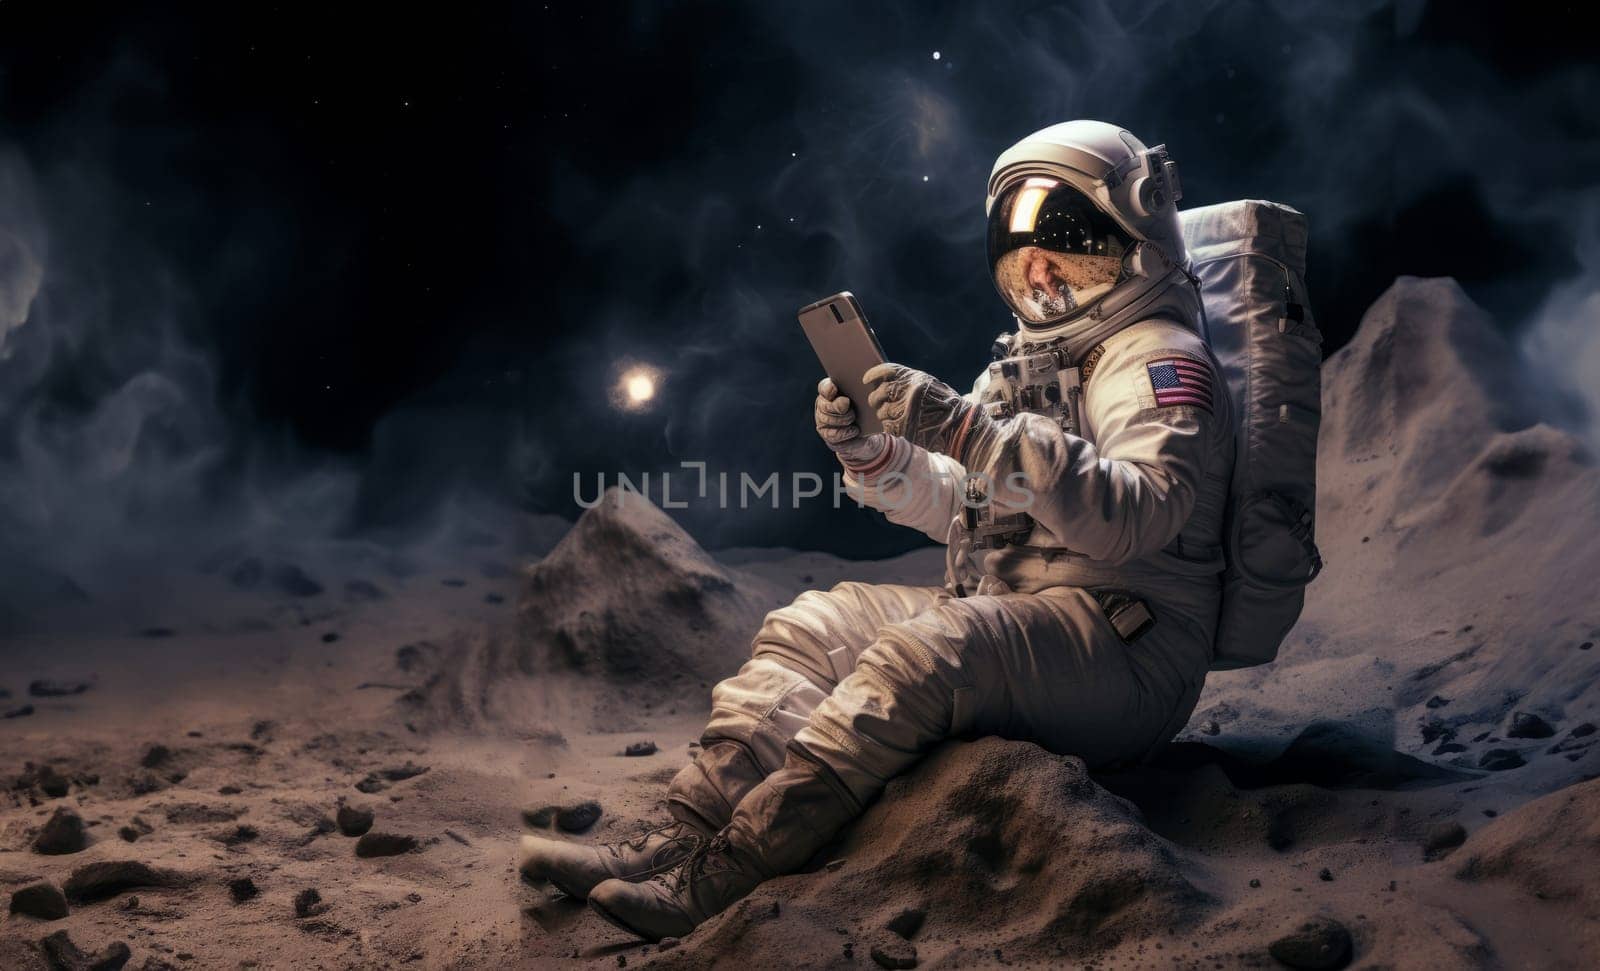 Astronaut Grandmother Uses Phone on the Moon.Generated image by dotshock